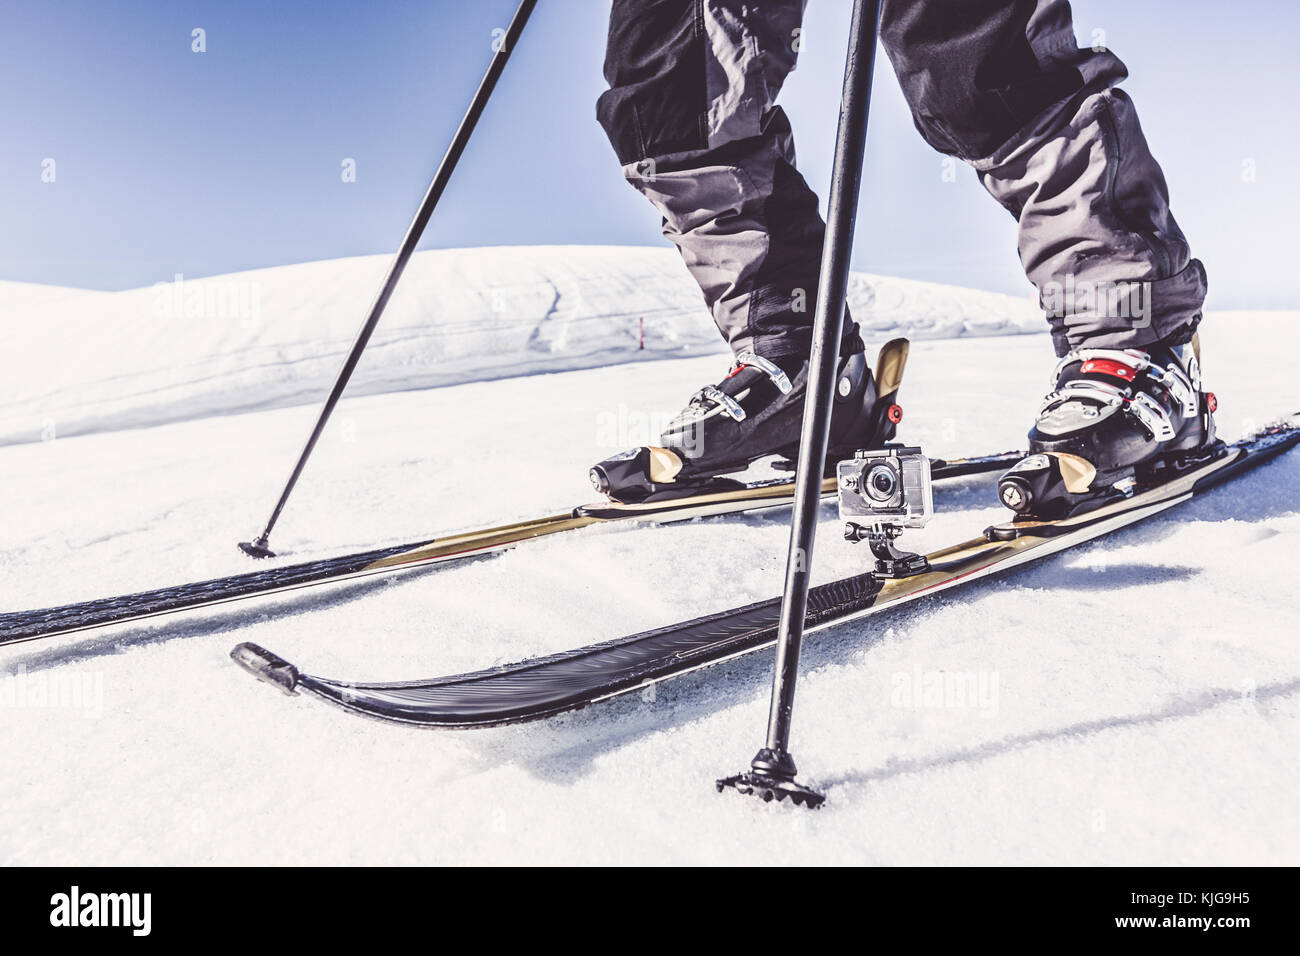 Close-up of skier with action cam in winter landscape Stock Photo